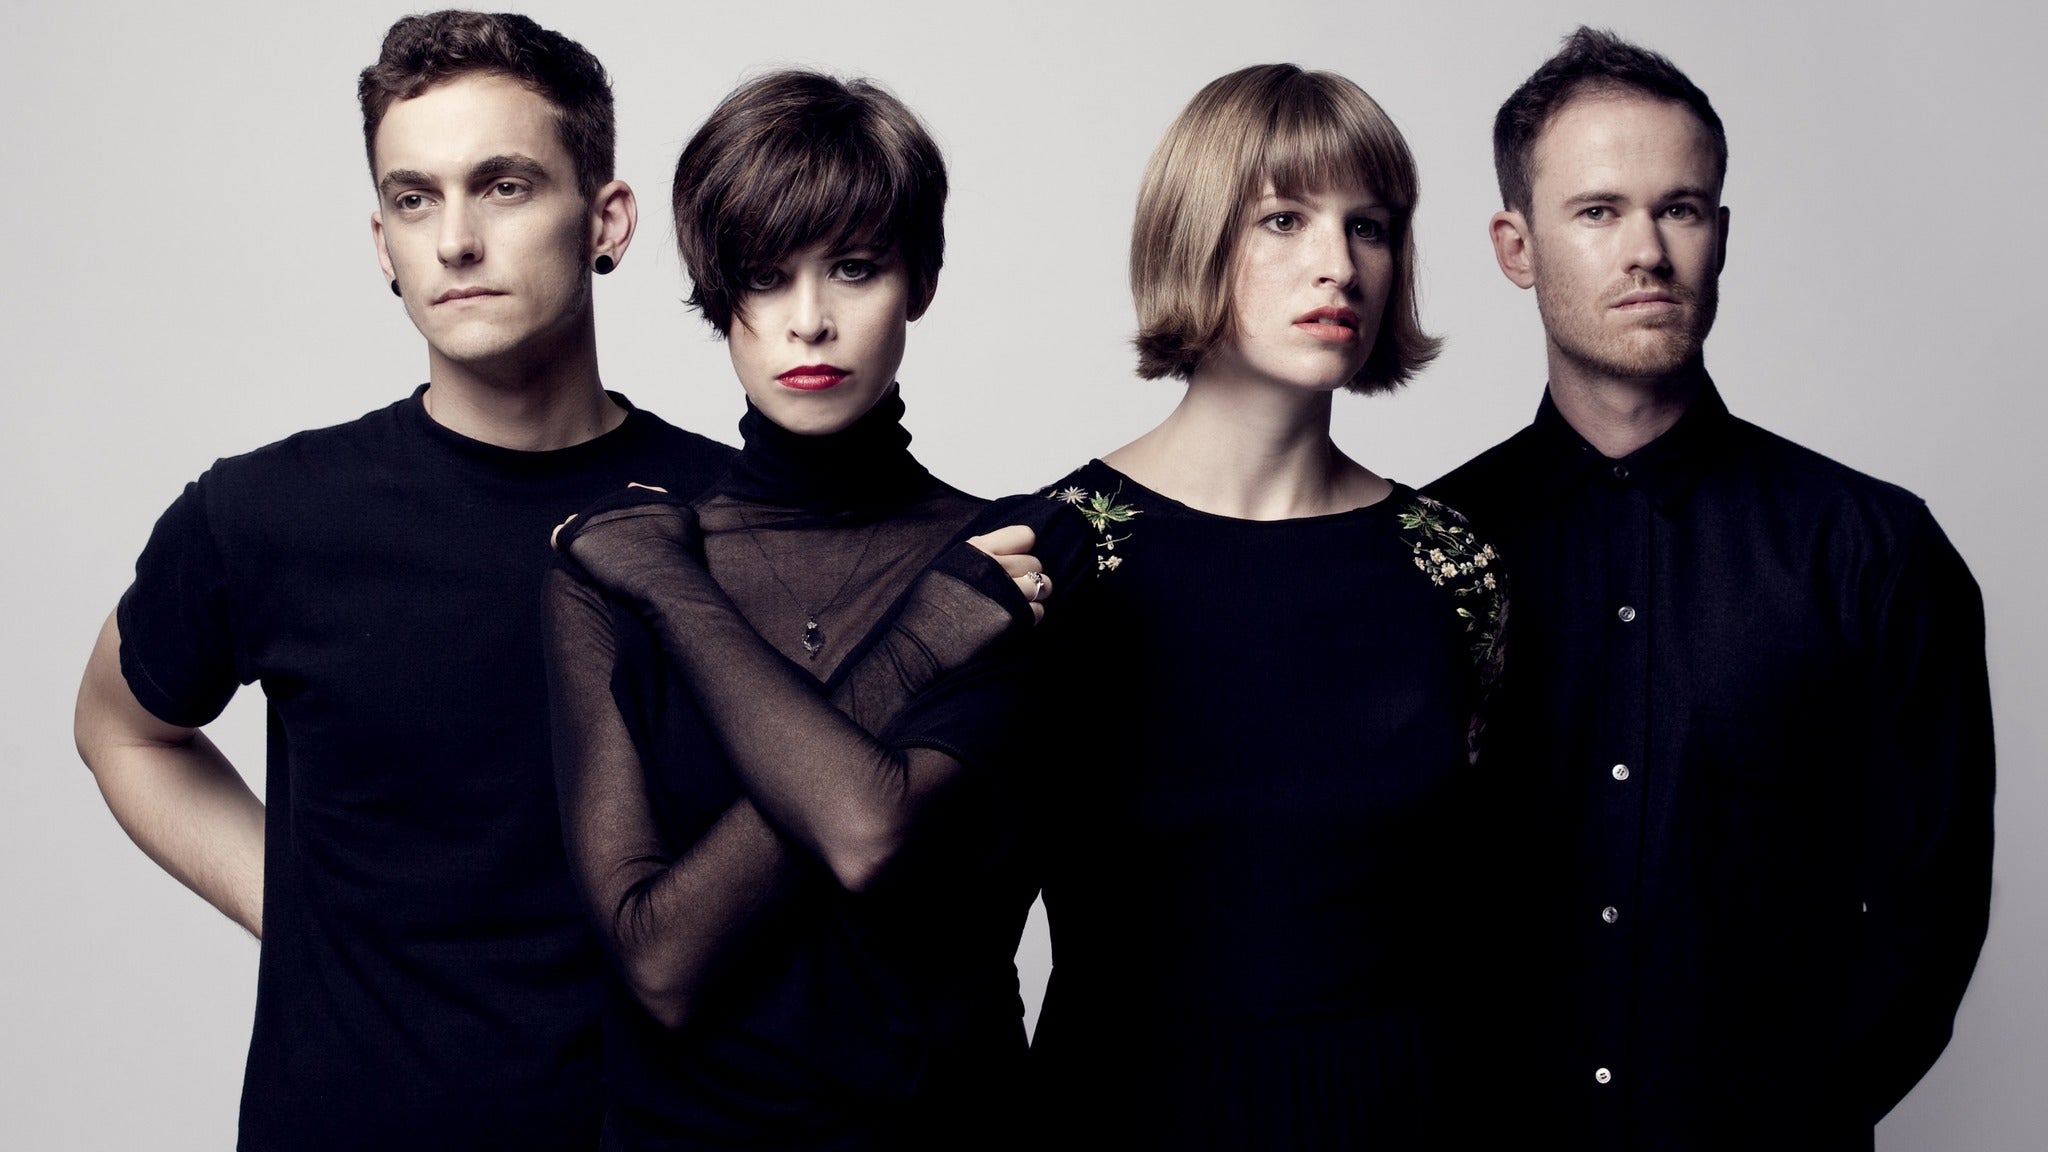 Image used with permission from Ticketmaster | The Jezabels tickets